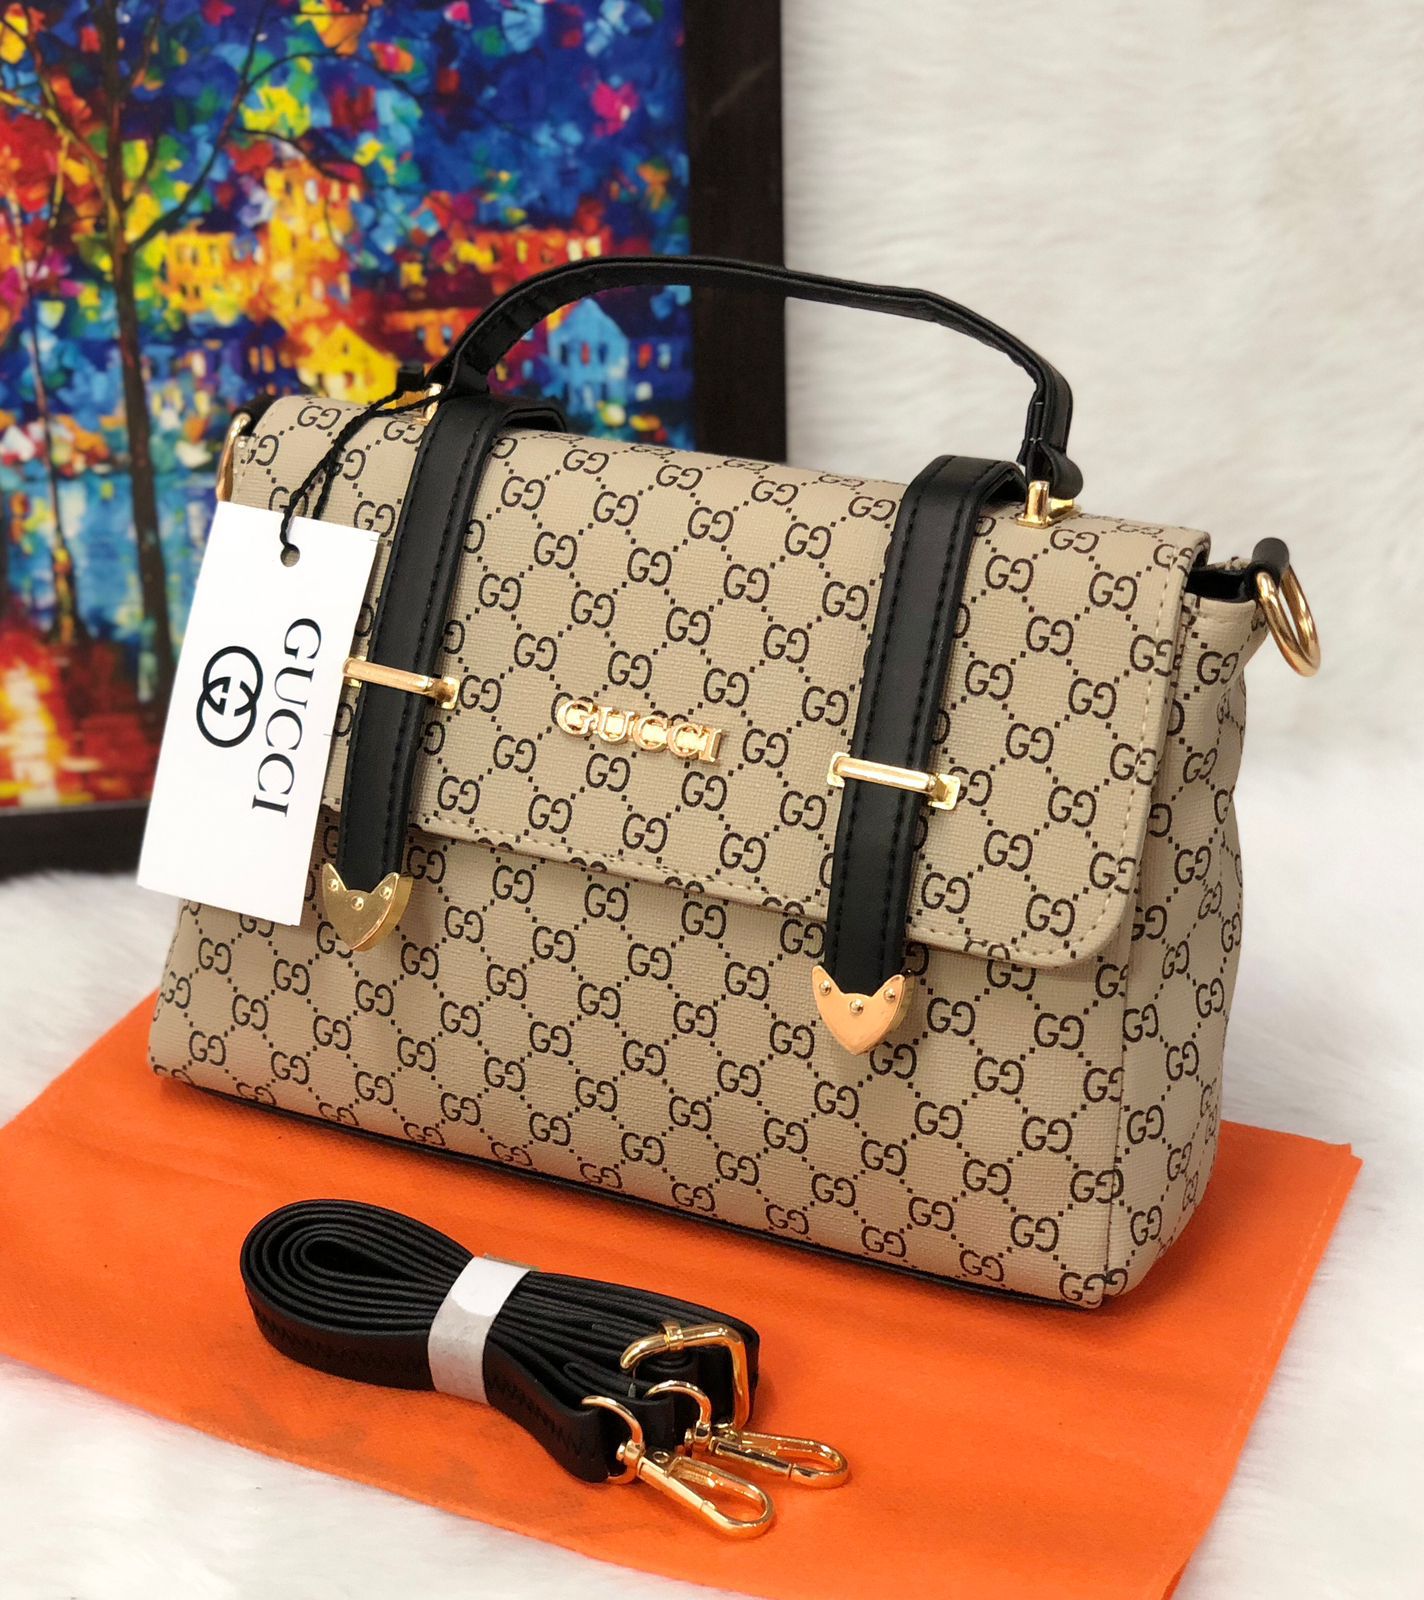 How to tell if a Gucci bag is fake?